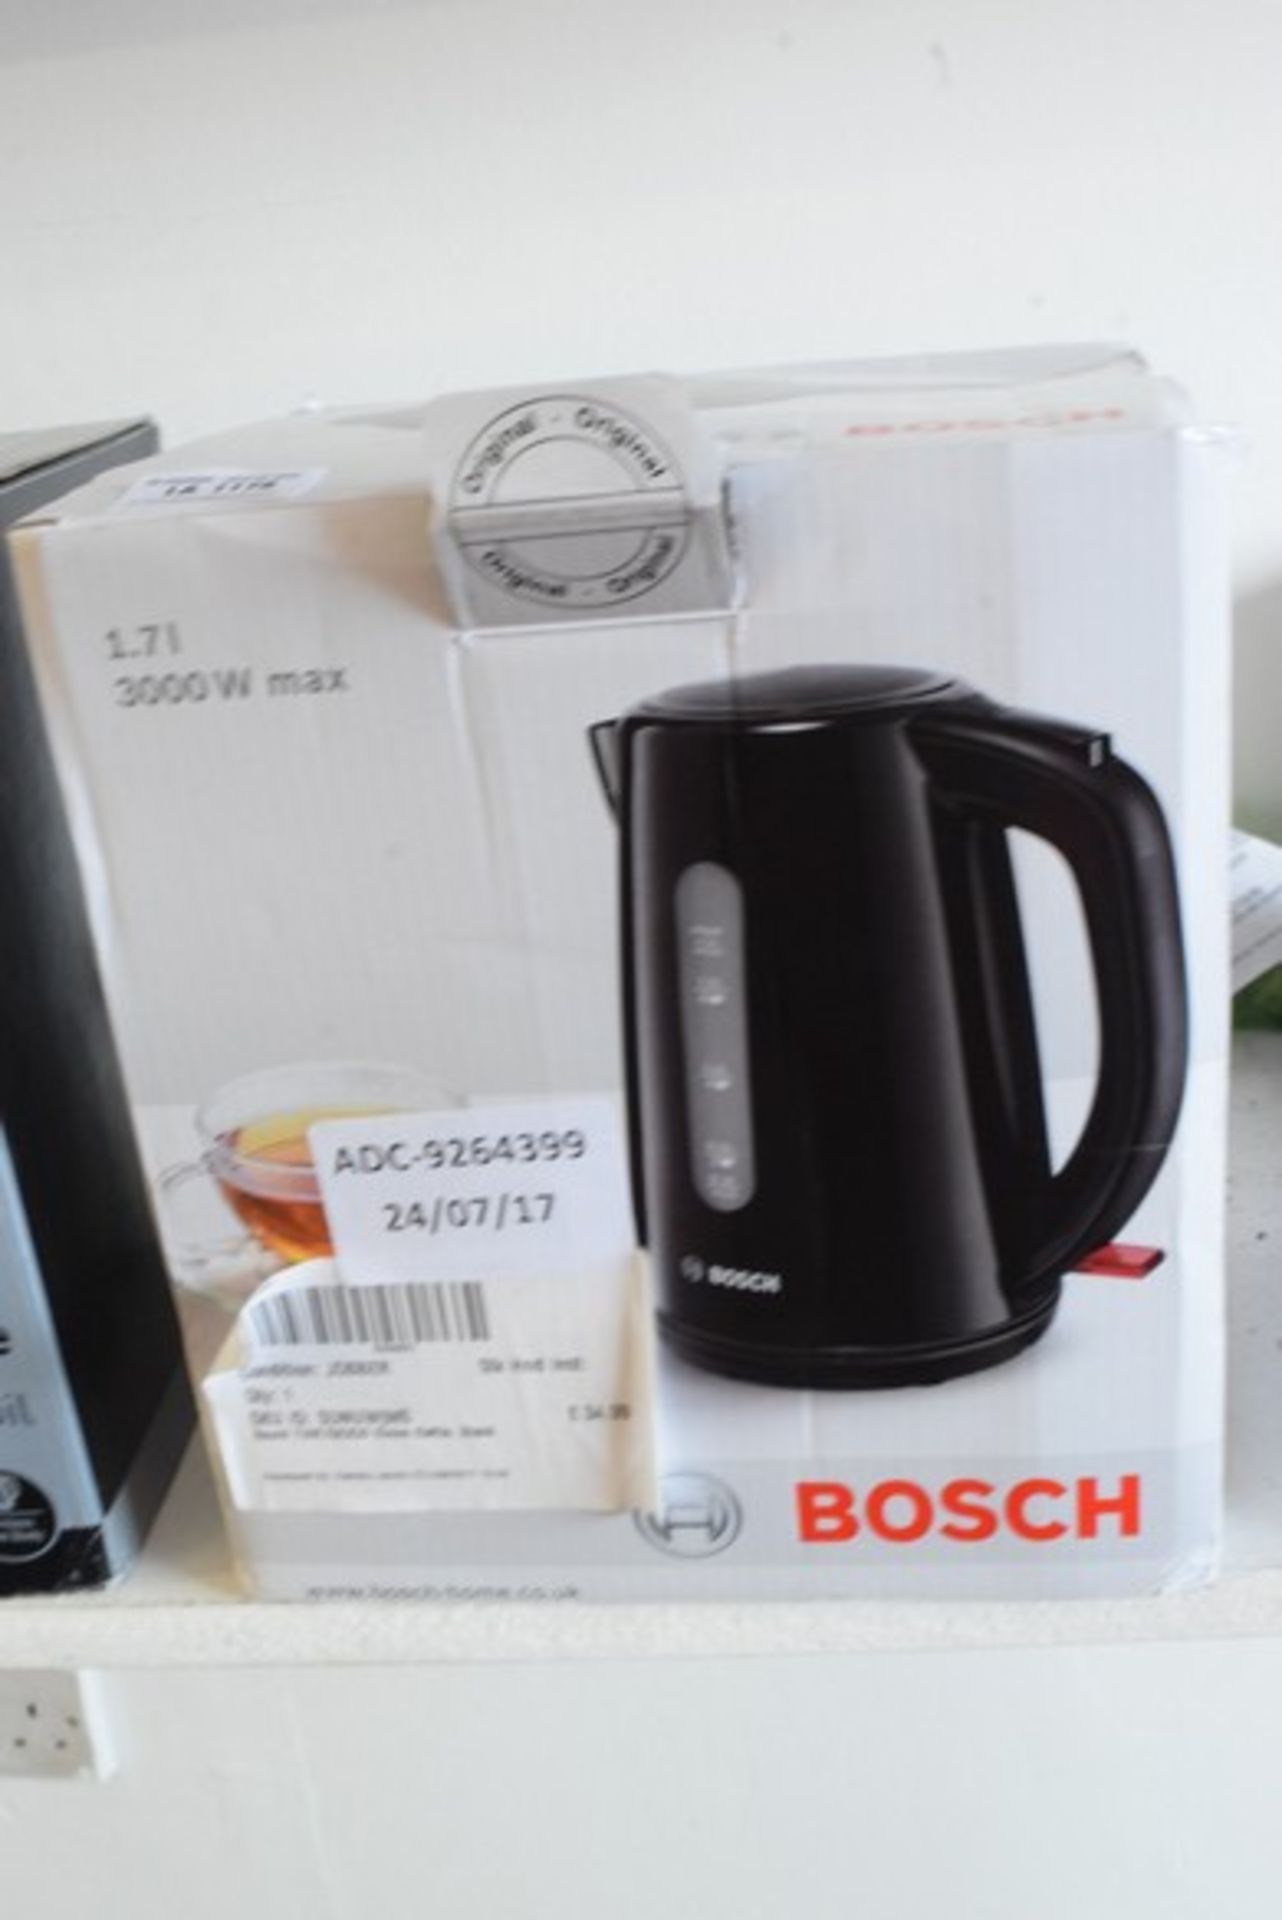 1 x BOSCH VISION KETTLE RRP £35 24/07/17 *PLEASE NOTE THAT THE BID PRICE IS MULTIPLIED BY THE NUMBER - Image 2 of 2